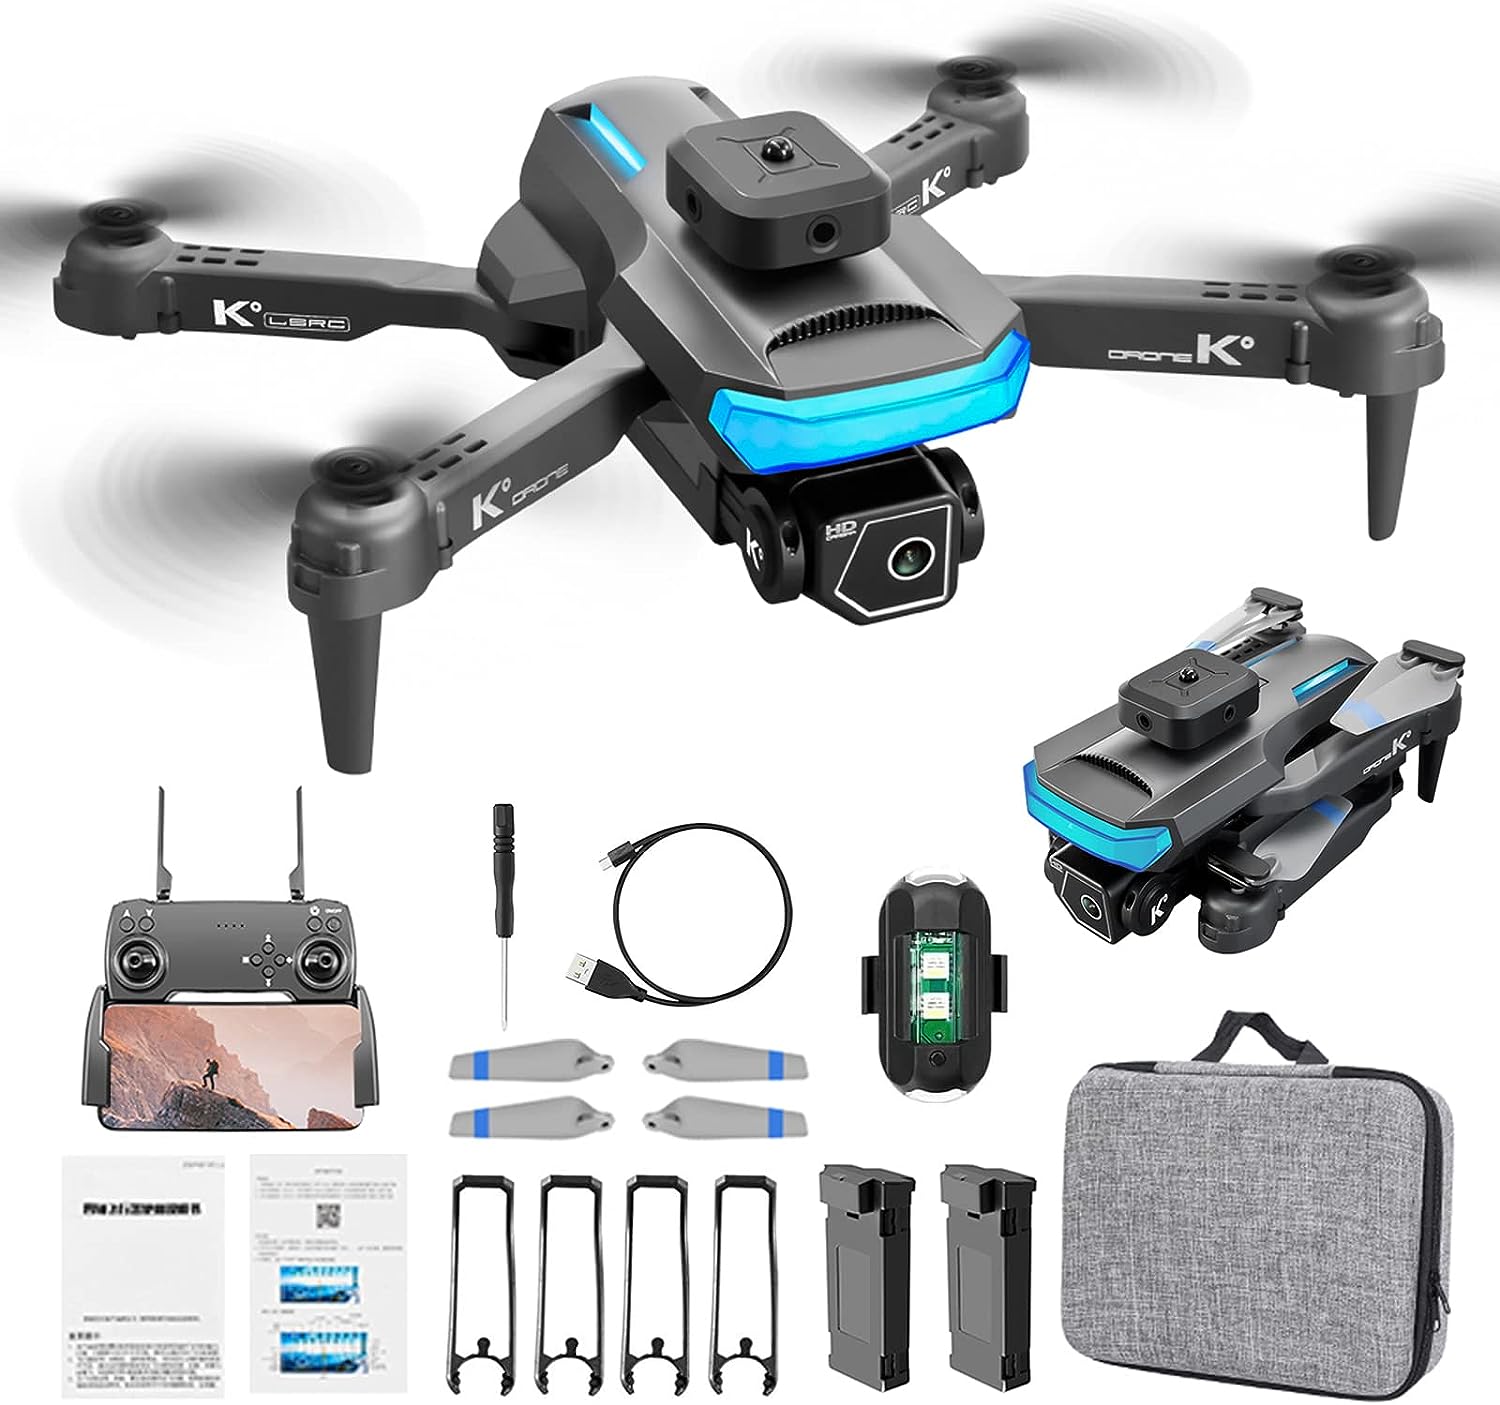 FIRE BULL Drone with Camera for Adults Kids, XT5 1080P FPV Live Video, Foldable WIFI RC Quadcopter with Dual camera switch, VR 3D Experience with 2 Batteriesm for 24 Min Flight, 3 Speeds, Toys Gifts for Boys Girls